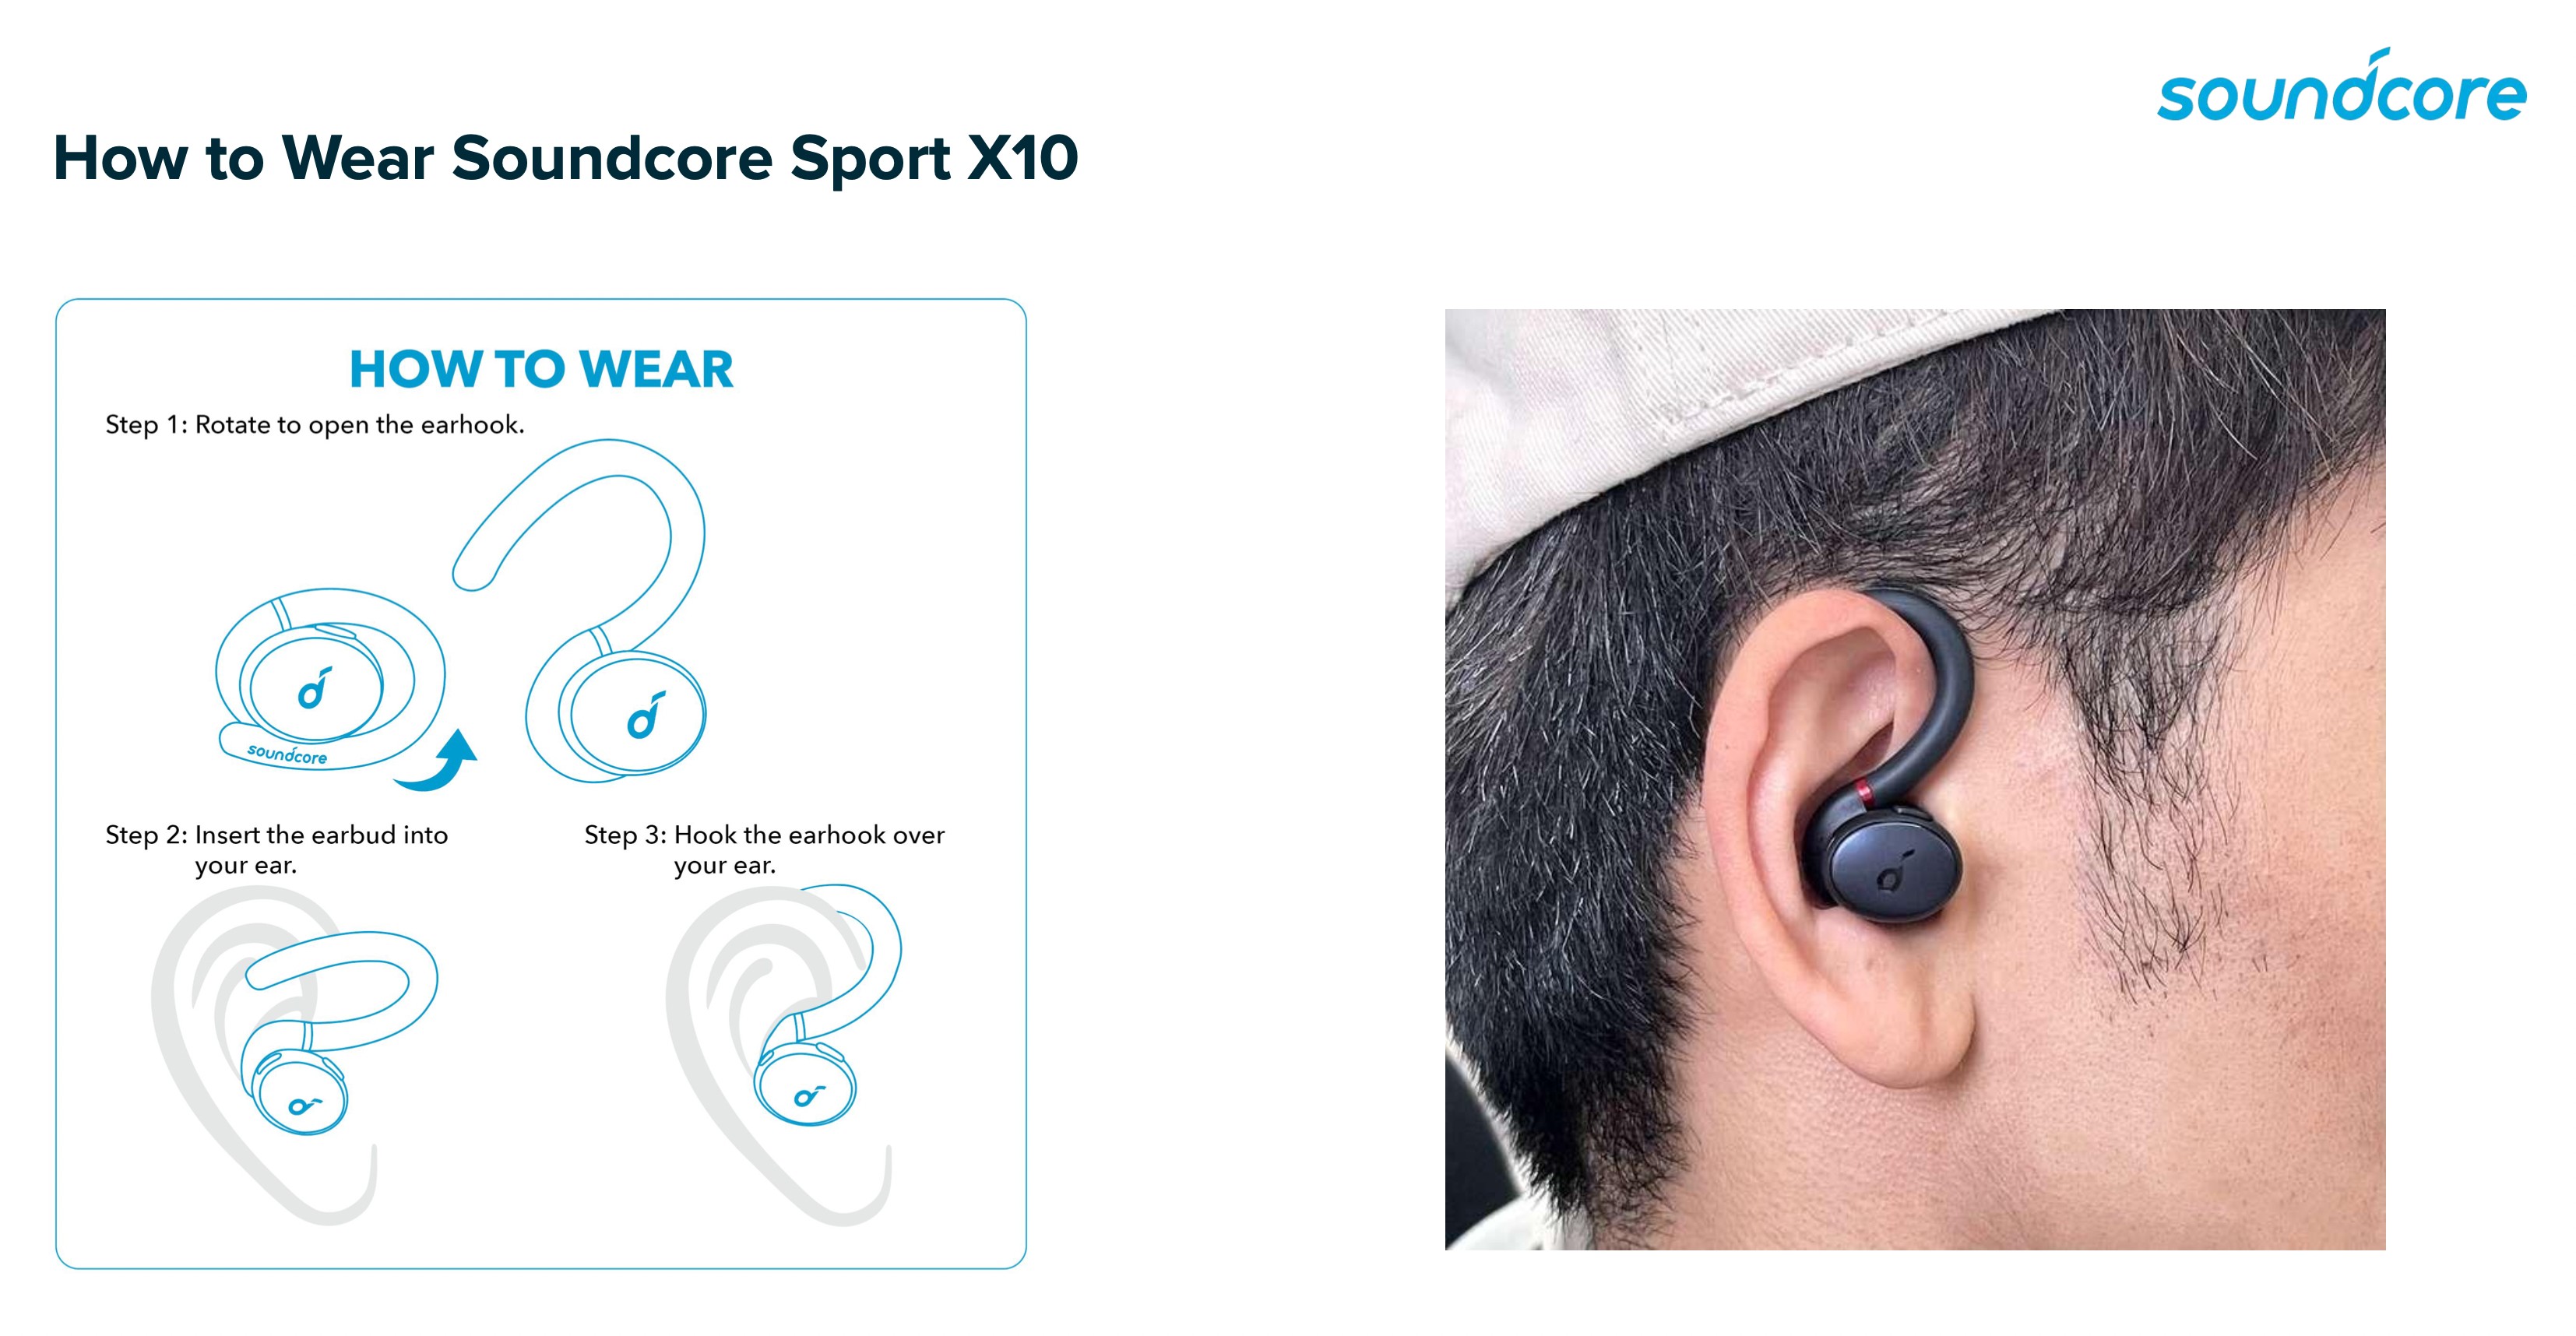 The ear hooks may look odd, but the fit is comfortable and secure.